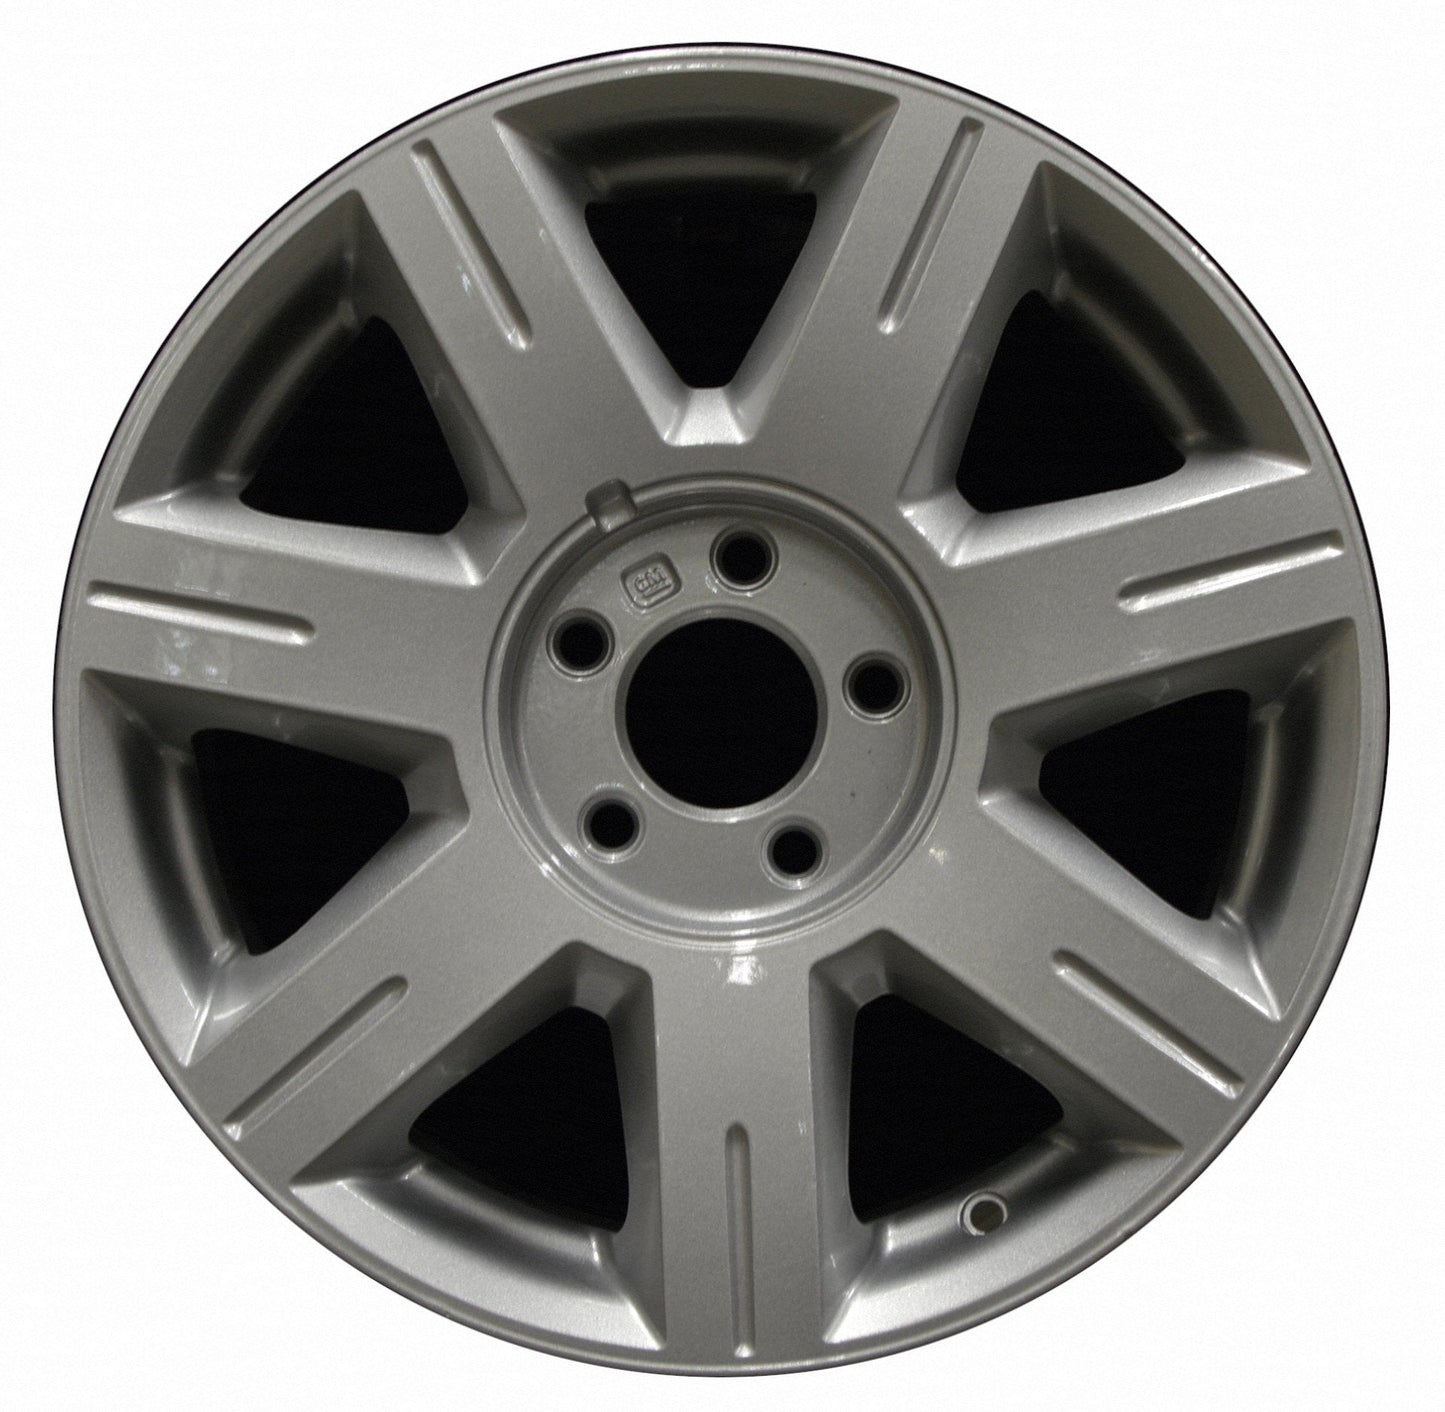 Cadillac DTS  2006, 2007 Factory OEM Car Wheel Size 17x7 Alloy WAO.4600A.PS09.FF